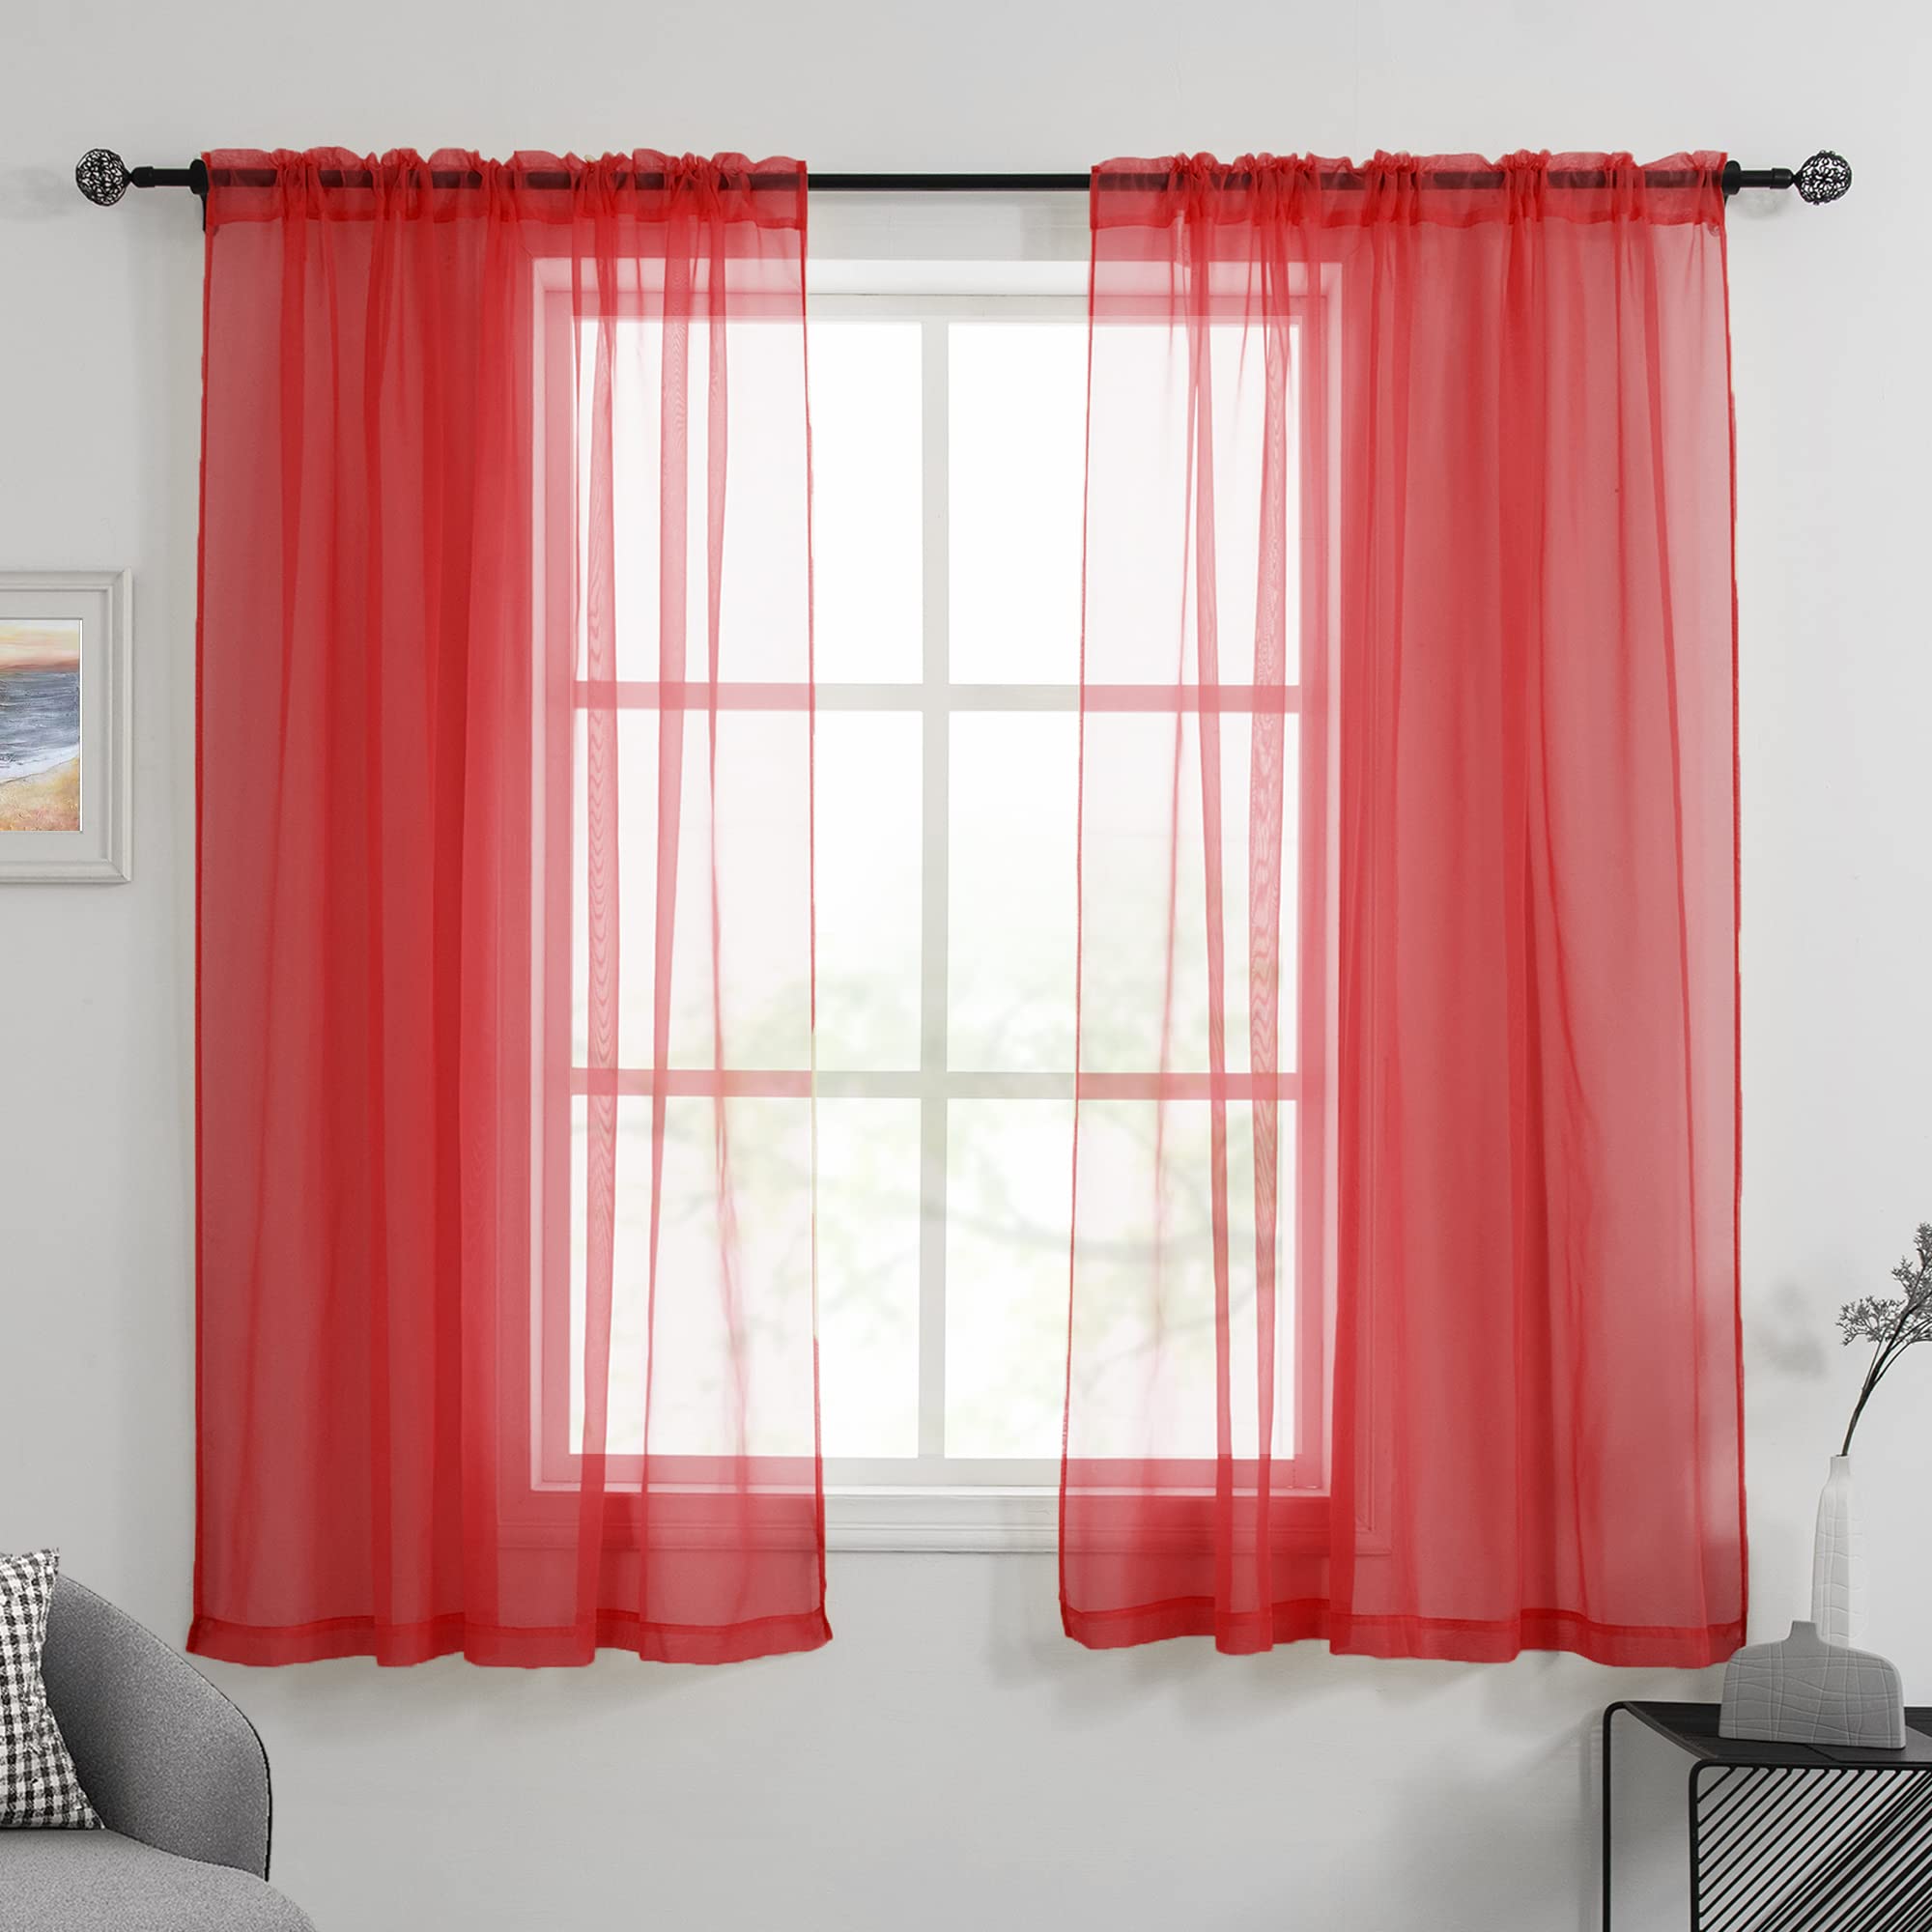 HUTO Christmas Red Sheer Curtains Window Drapes 2 Panels Rod Pocket Voile Sheer Panels Curtains 63 inches Long for Bedroom Livin